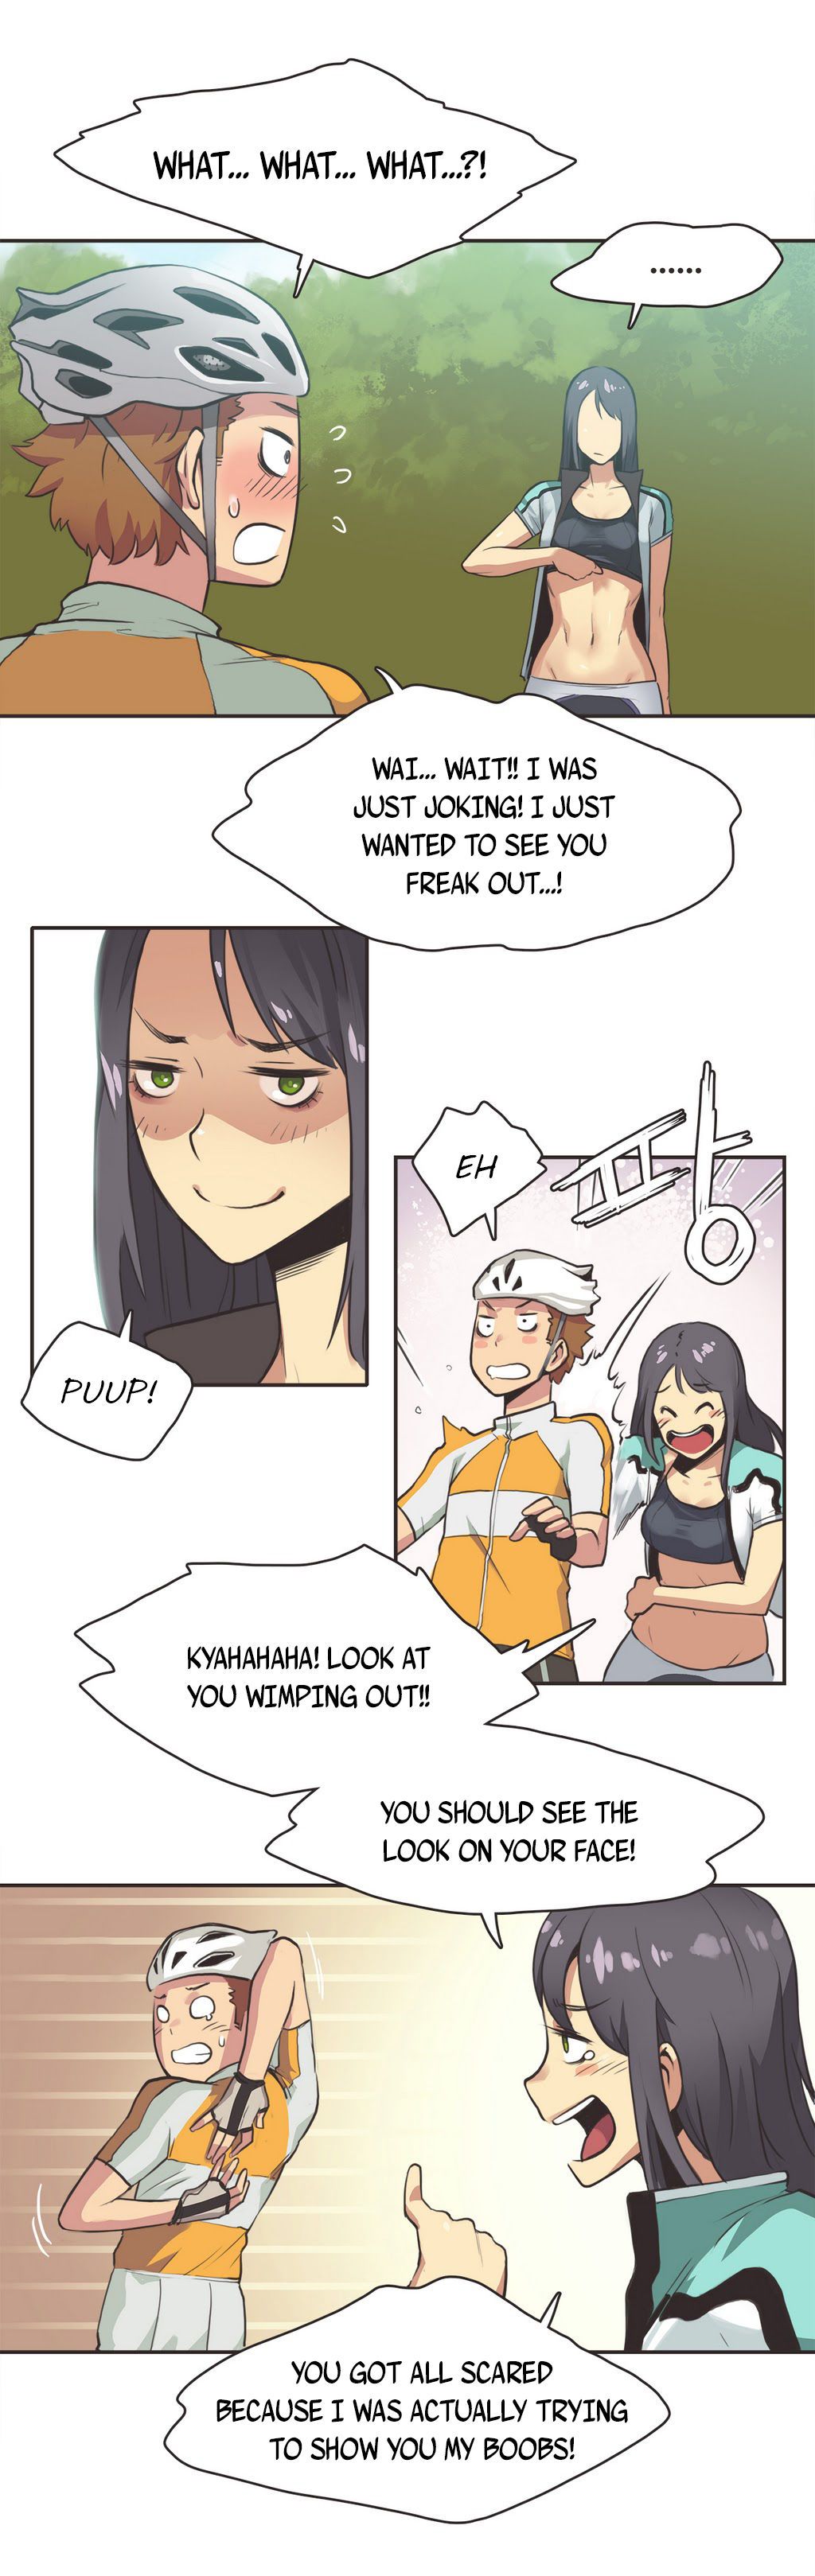 gamang sports Fille ch.1 28 () (yomanga) PARTIE 10